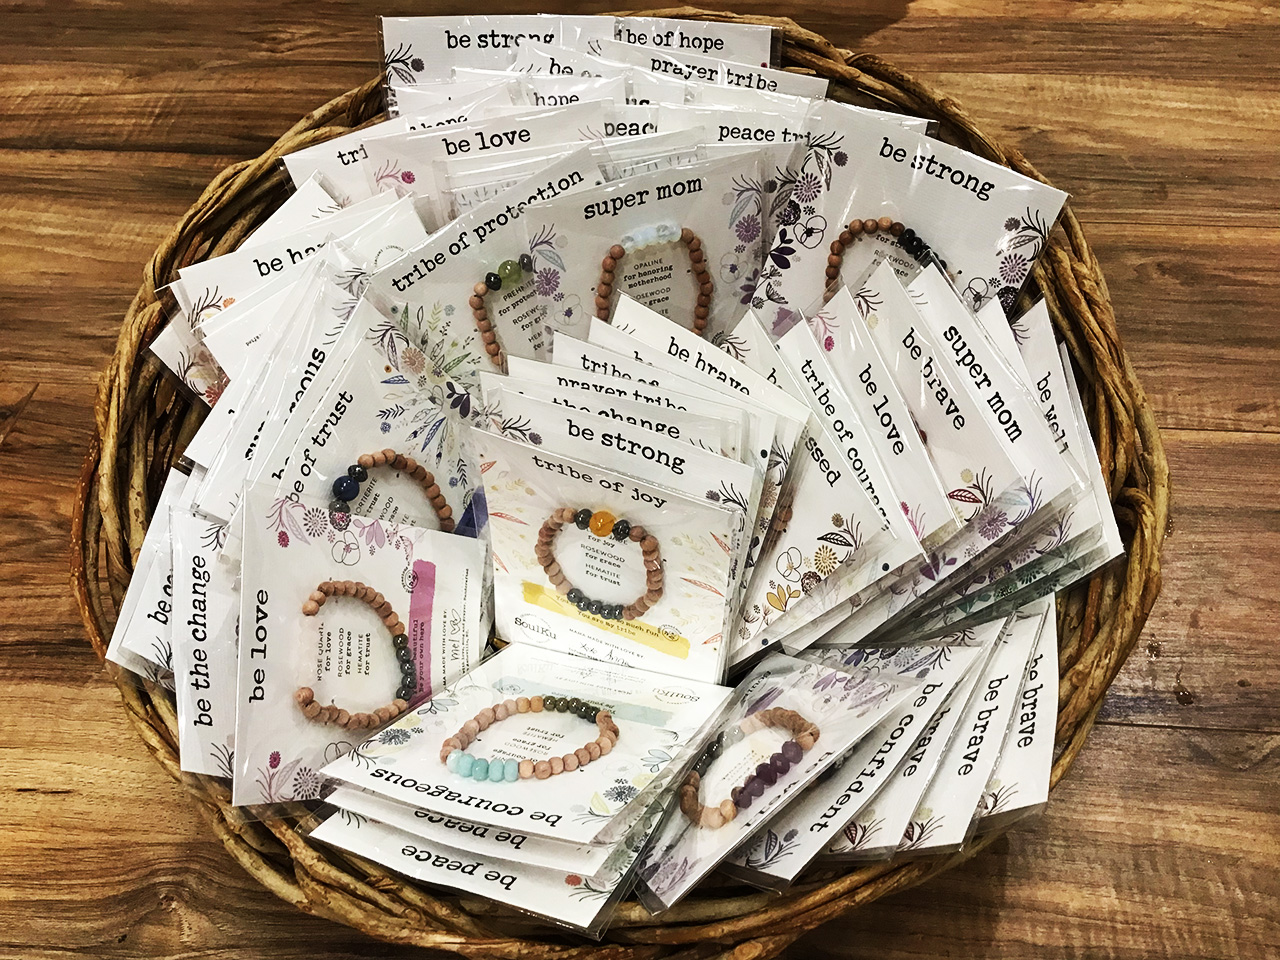 Bracelets made by stay at home moms with intentions